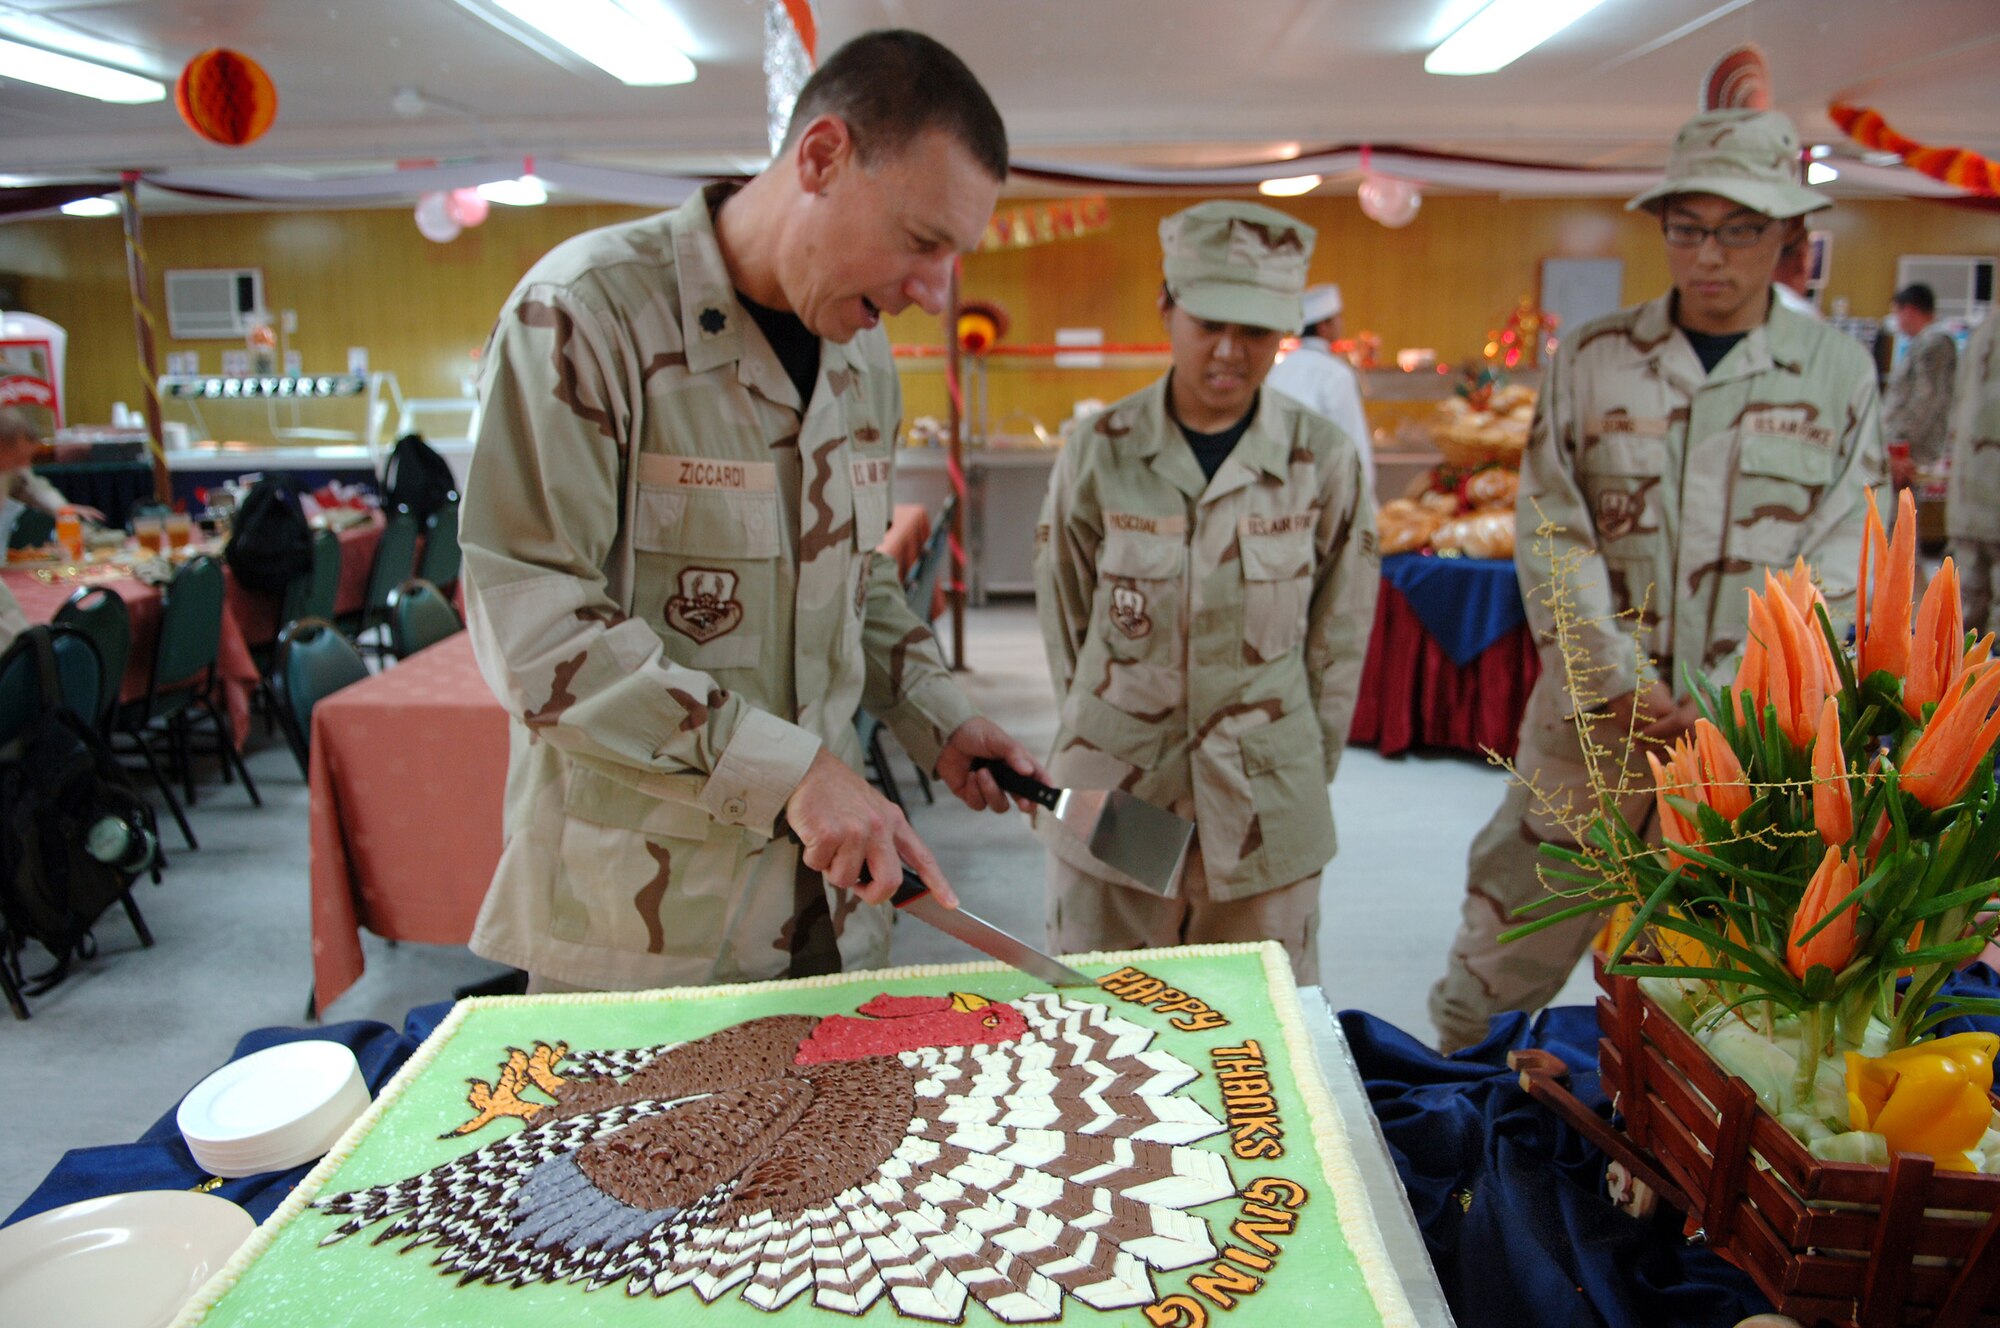 SOUTHWEST ASIA - Chaplain (Lt. Col.) Gary Ziccardi, 379th Air Expeditionary Wing chaplain, cuts the Thanksgiving Day cake Nov. 22 as Senior Airman Nikky Pascual, and Airman 1st Class June Seong, 379th Expedtionary Services Squadron, stand by at the Independence Dining Facility at a Southwest Asia air base.  Both Airmen are deployed from Nellis AFB, Nev. Airman Pascual is from Honolulu, Hawaii, and Airman Seong is from Tae-jeon, Korea. (U.S. Air Force Photo/Master Sgt. Greg Kunkle)